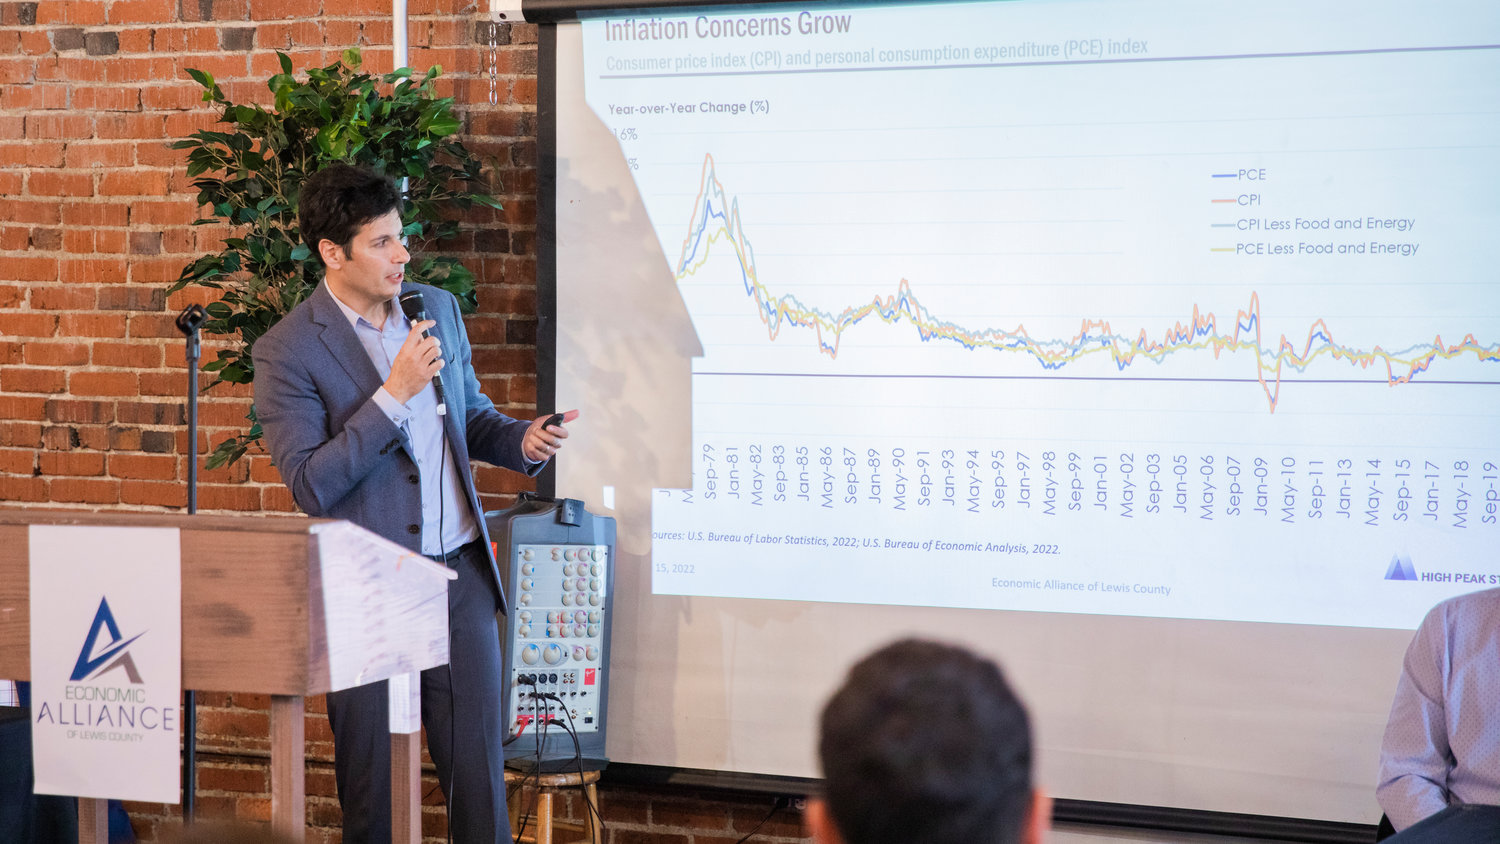 Spencer Cohen talks about Inflation during a presentation inside The Loft for an Economic Alliance Summit event in Chehalis on Thursday.